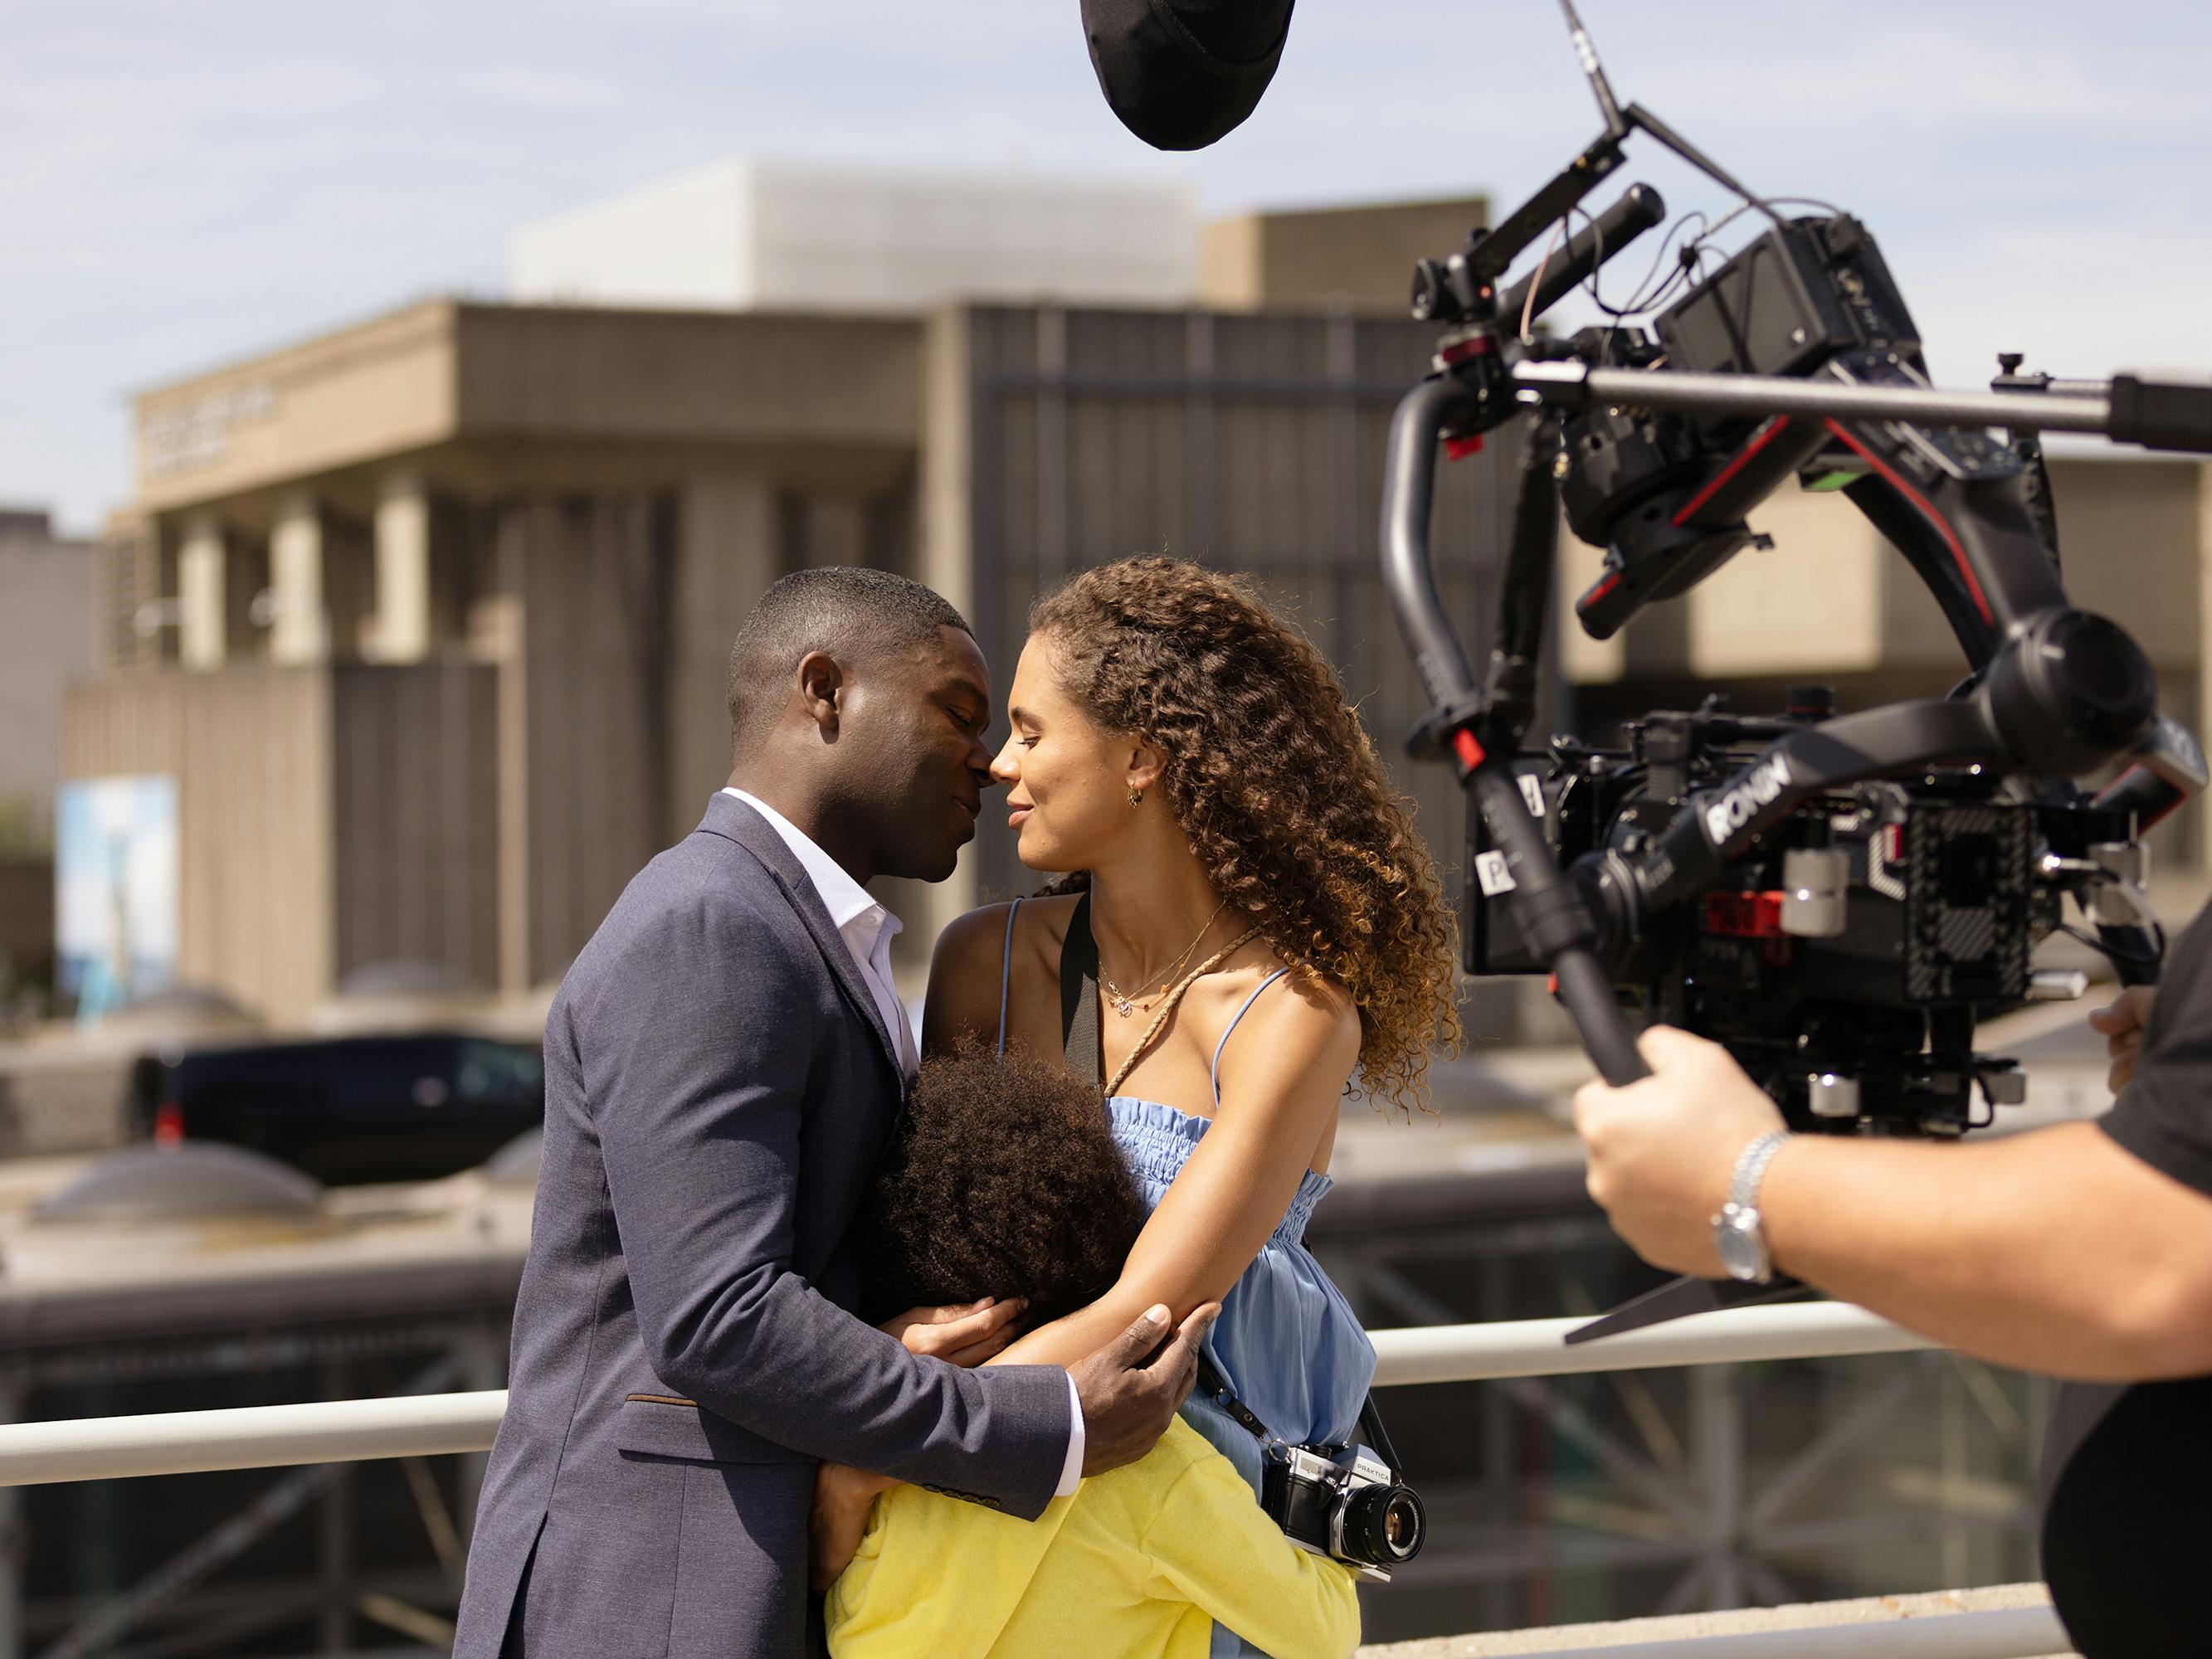 Dayo (David Oyelowo), Laura (Amelie Dokubo), and Amanda (Jessica Plummer) stand together on a bridge. David wears a navy suit, Amanda wears a strappy blue dress, and Laura wears a neon yellow hoodie.